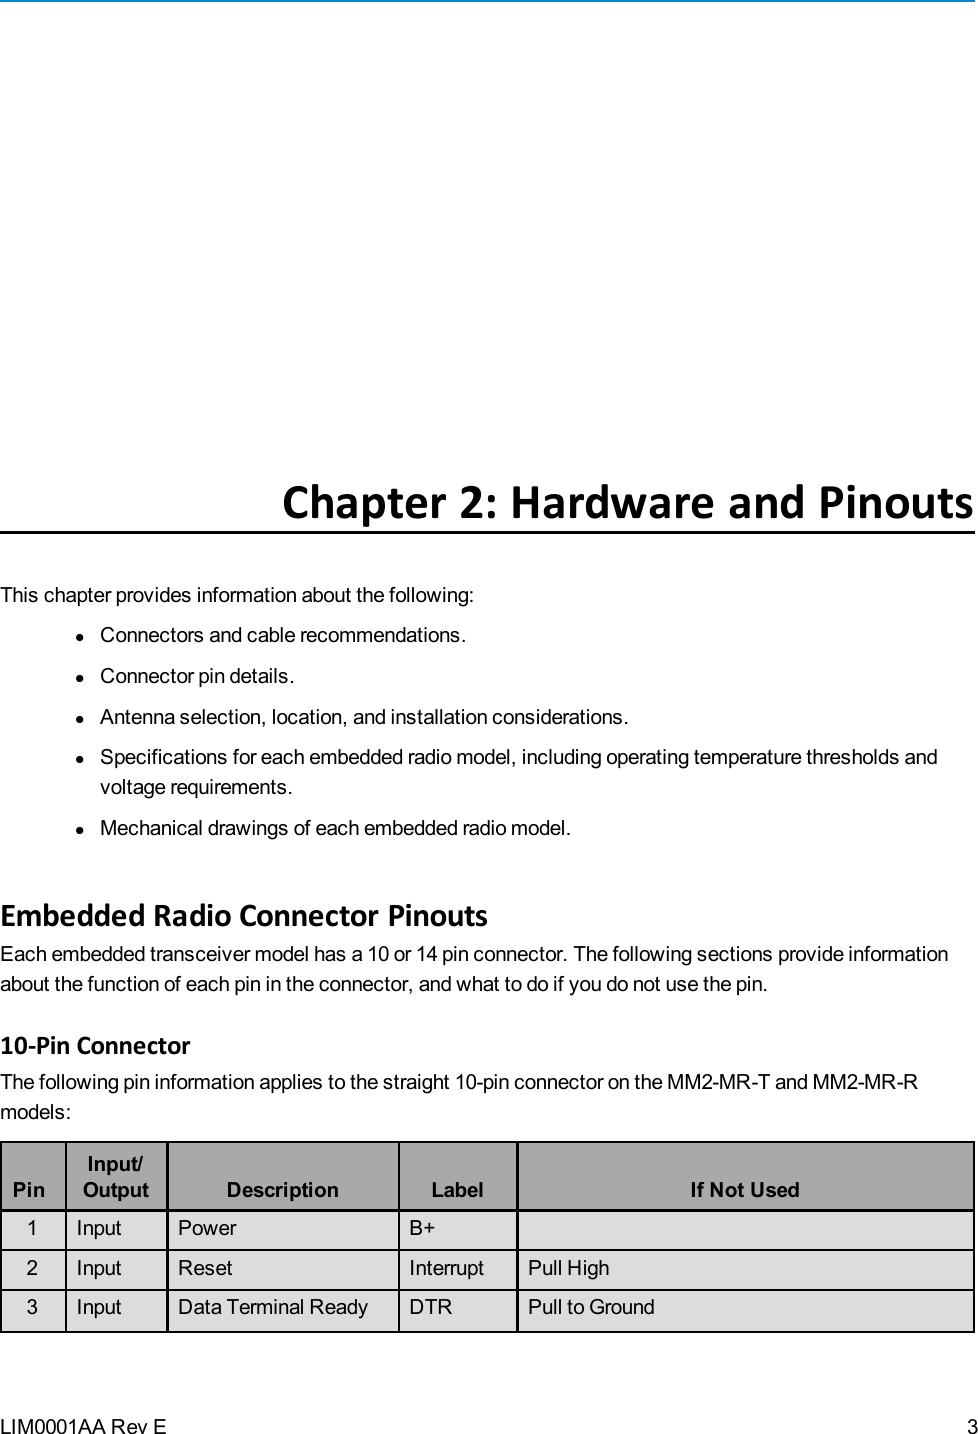 LIM0001AA Rev EChapter 2: Hardware and PinoutsThis chapter provides information about the following:lConnectors and cable recommendations.lConnector pin details.lAntenna selection, location, and installation considerations.lSpecifications for each embedded radio model, including operating temperature thresholds andvoltage requirements.lMechanical drawings of each embedded radio model.Embedded Radio Connector PinoutsEach embedded transceiver model has a 10 or 14 pin connector. The following sections provide informationabout the function of each pin in the connector, and what to do if you do not use the pin.10-Pin ConnectorThe following pin information applies to the straight 10-pin connector on the MM2-MR-T and MM2-MR-Rmodels:PinInput/Output Description Label If Not Used1 Input Power B+2 Input Reset Interrupt Pull High3 Input Data Terminal Ready DTR Pull to Ground3